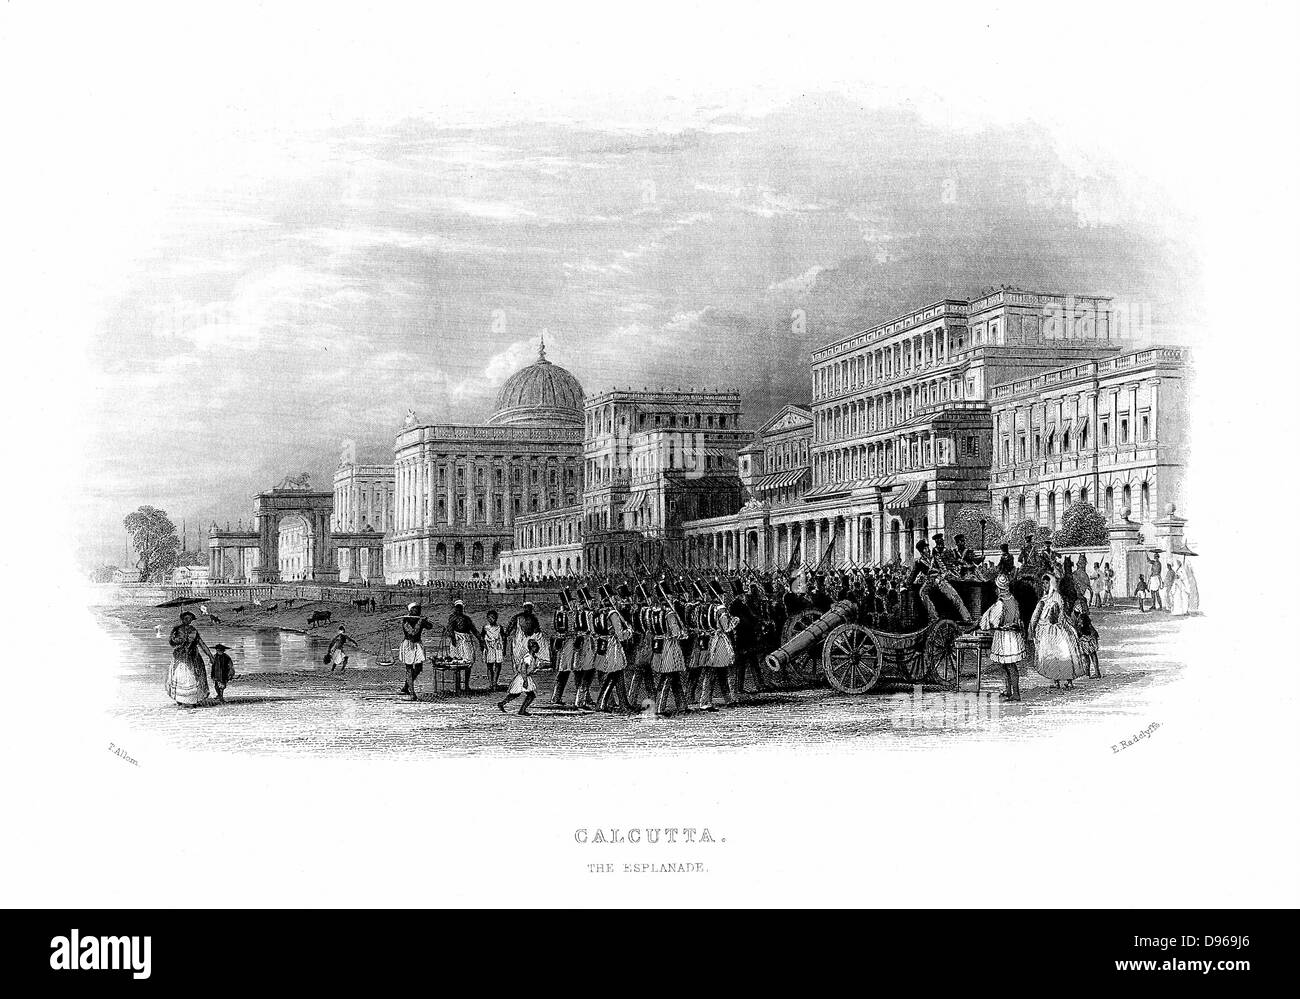 British troops parading on the Esplanade, Calcutta, India. Mid-19th century steel engraving. Stock Photo